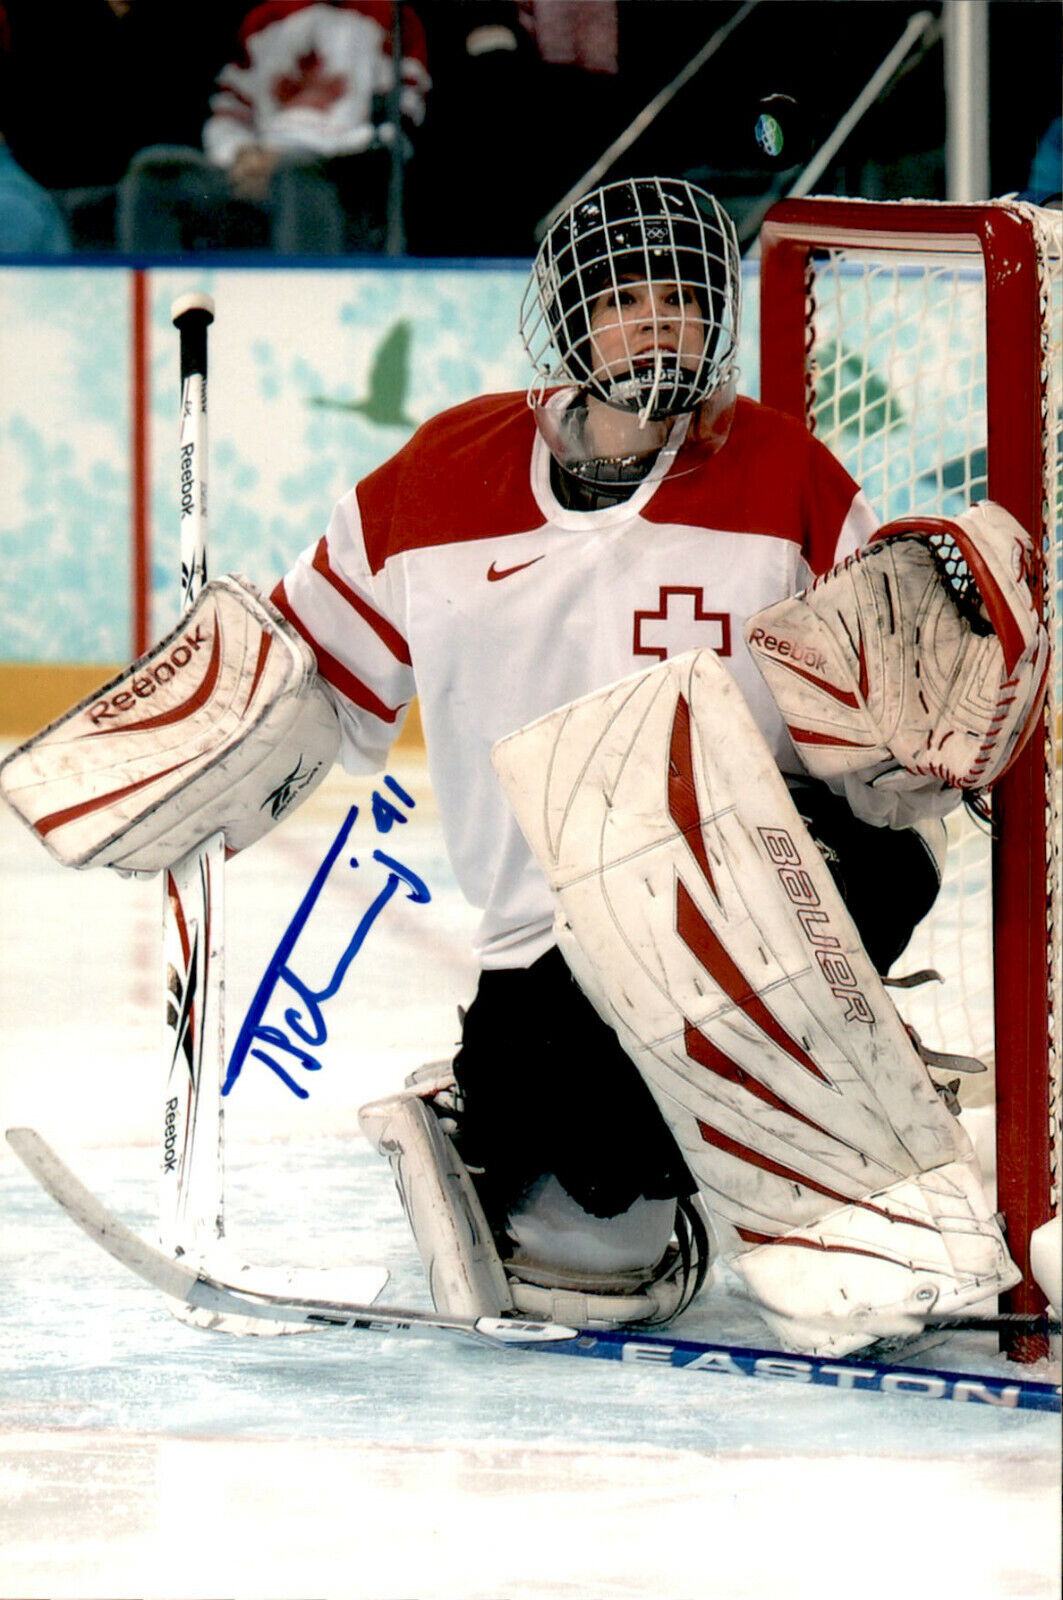 Florence Schelling SIGNED 4x6 Photo Poster painting WOMEN'S HOCKEY OLYMPICS TEAM SWITZERLAND #2